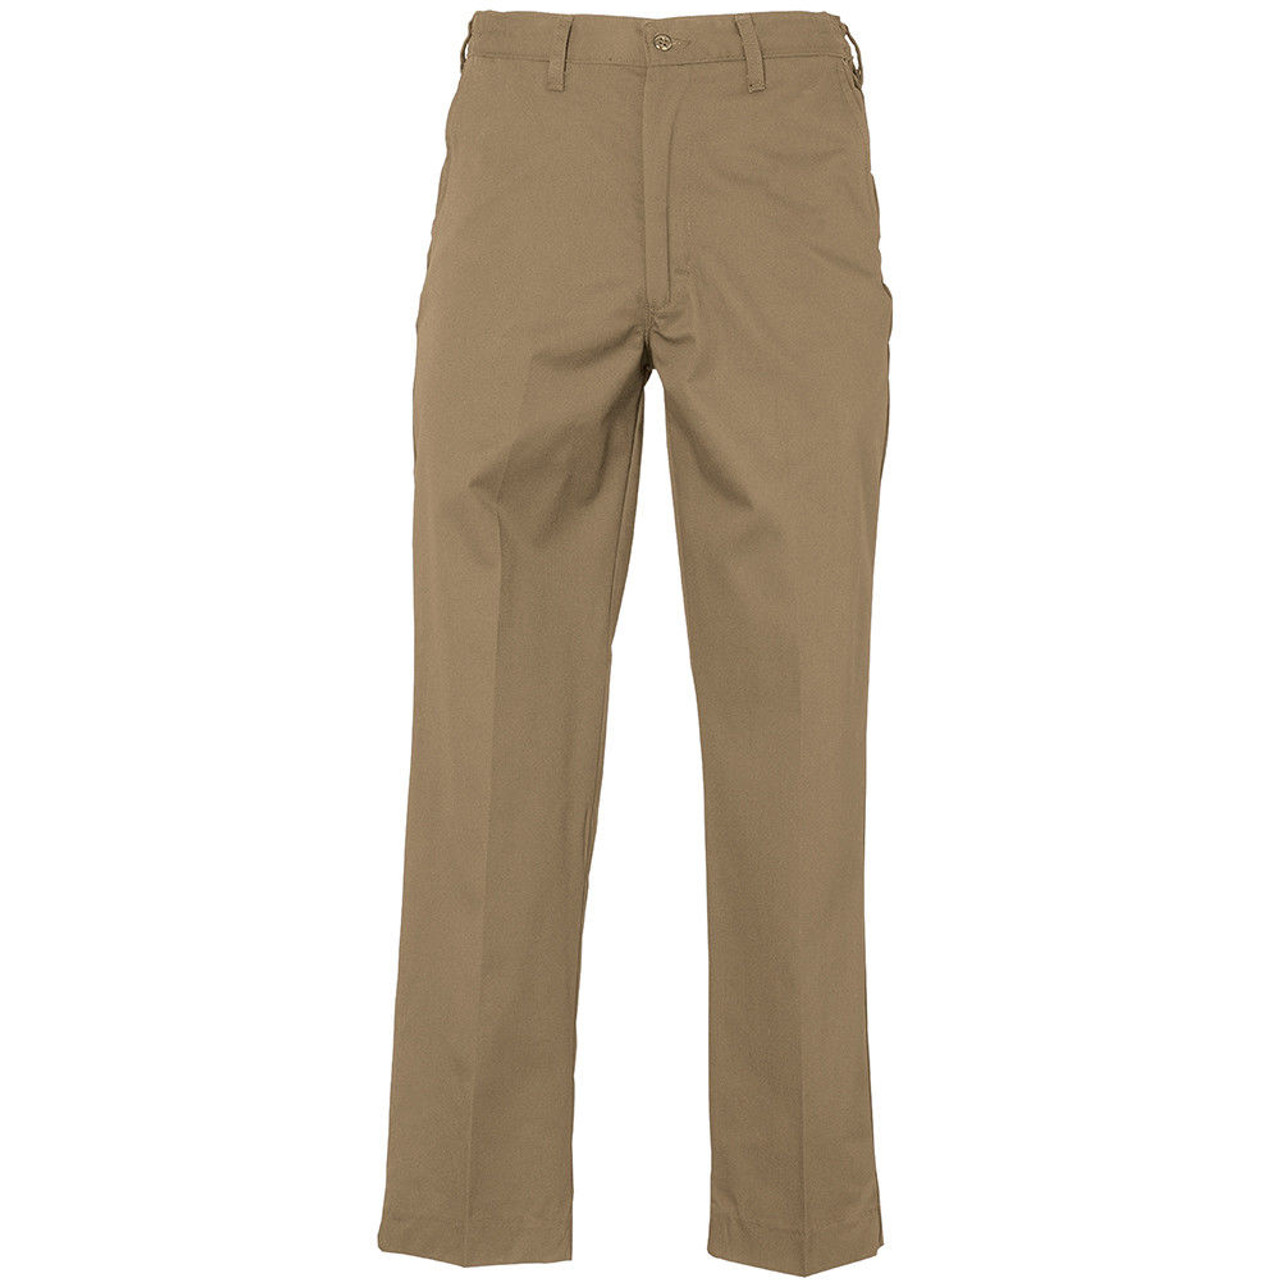 REFLECTIVE STRETCH WORK PANTS - WP-3T